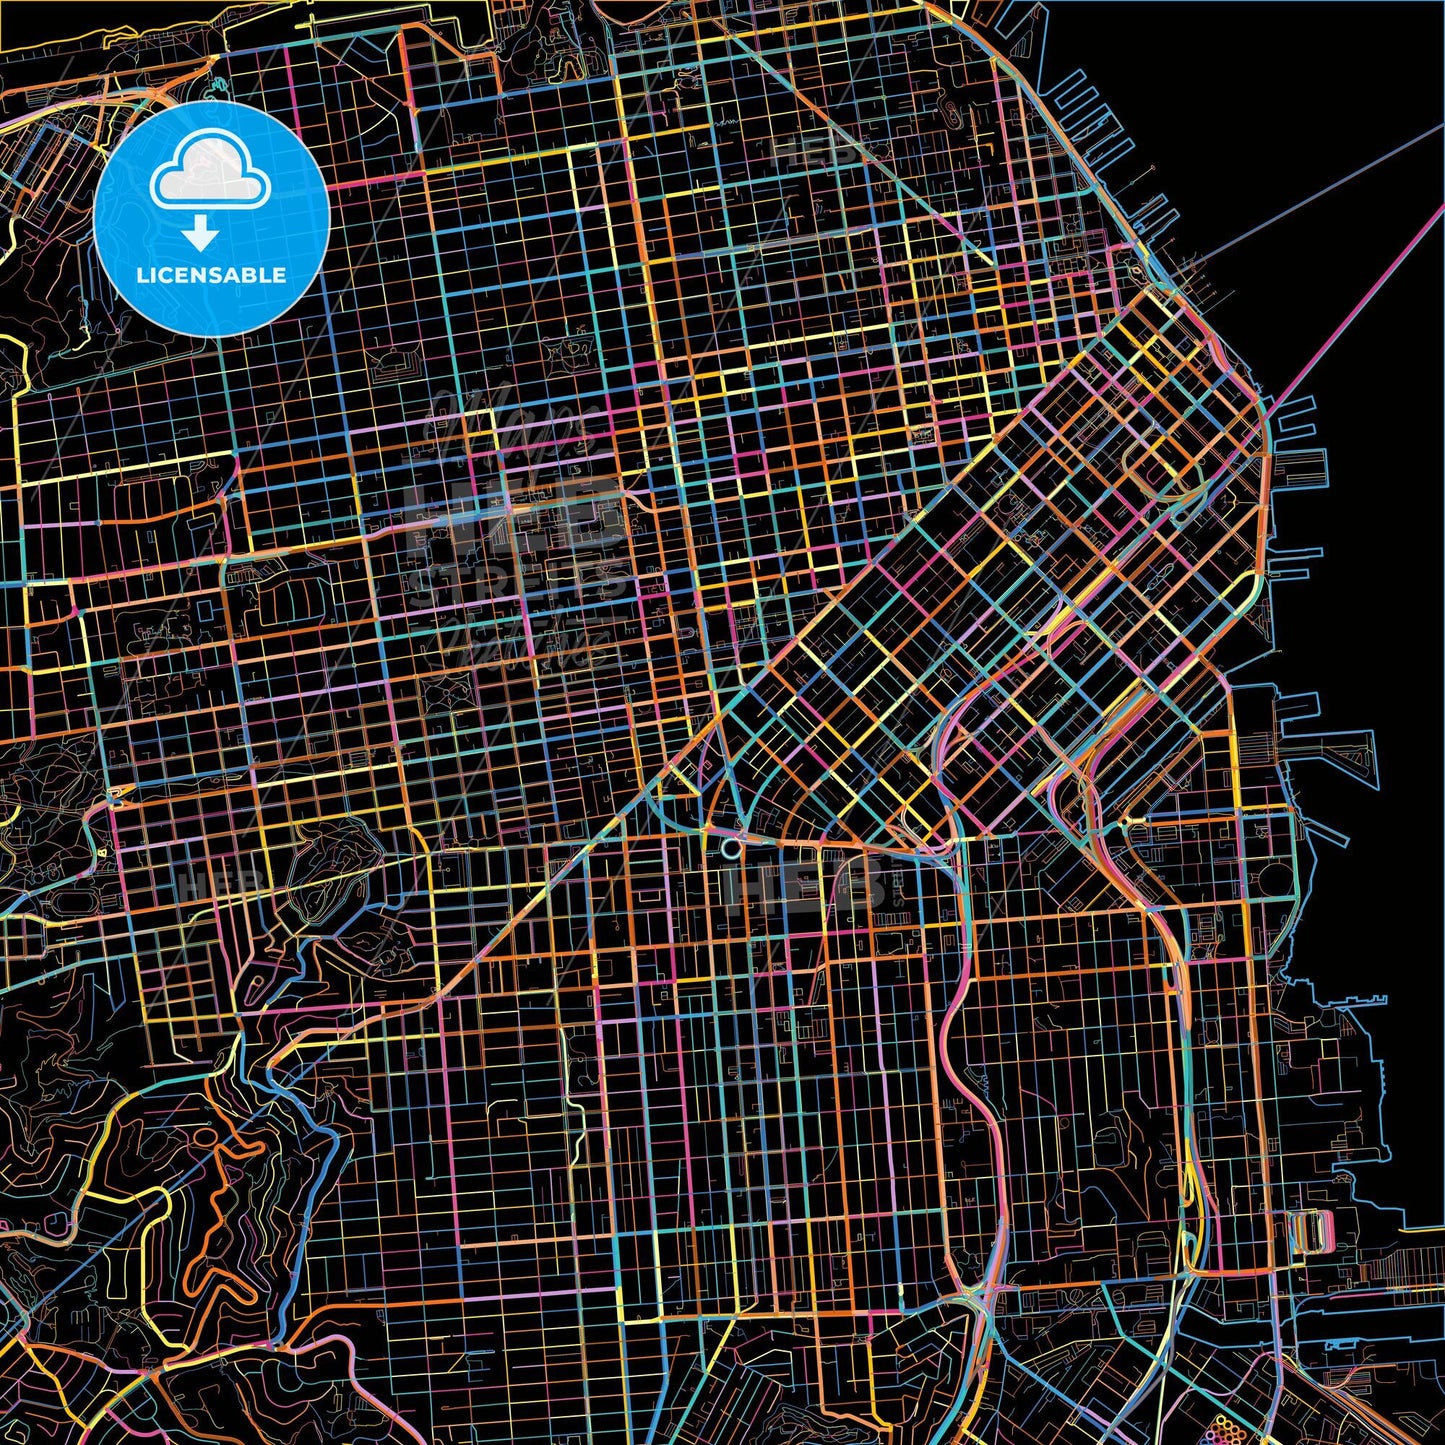 San Francisco, California, United States, colorful city map on black background